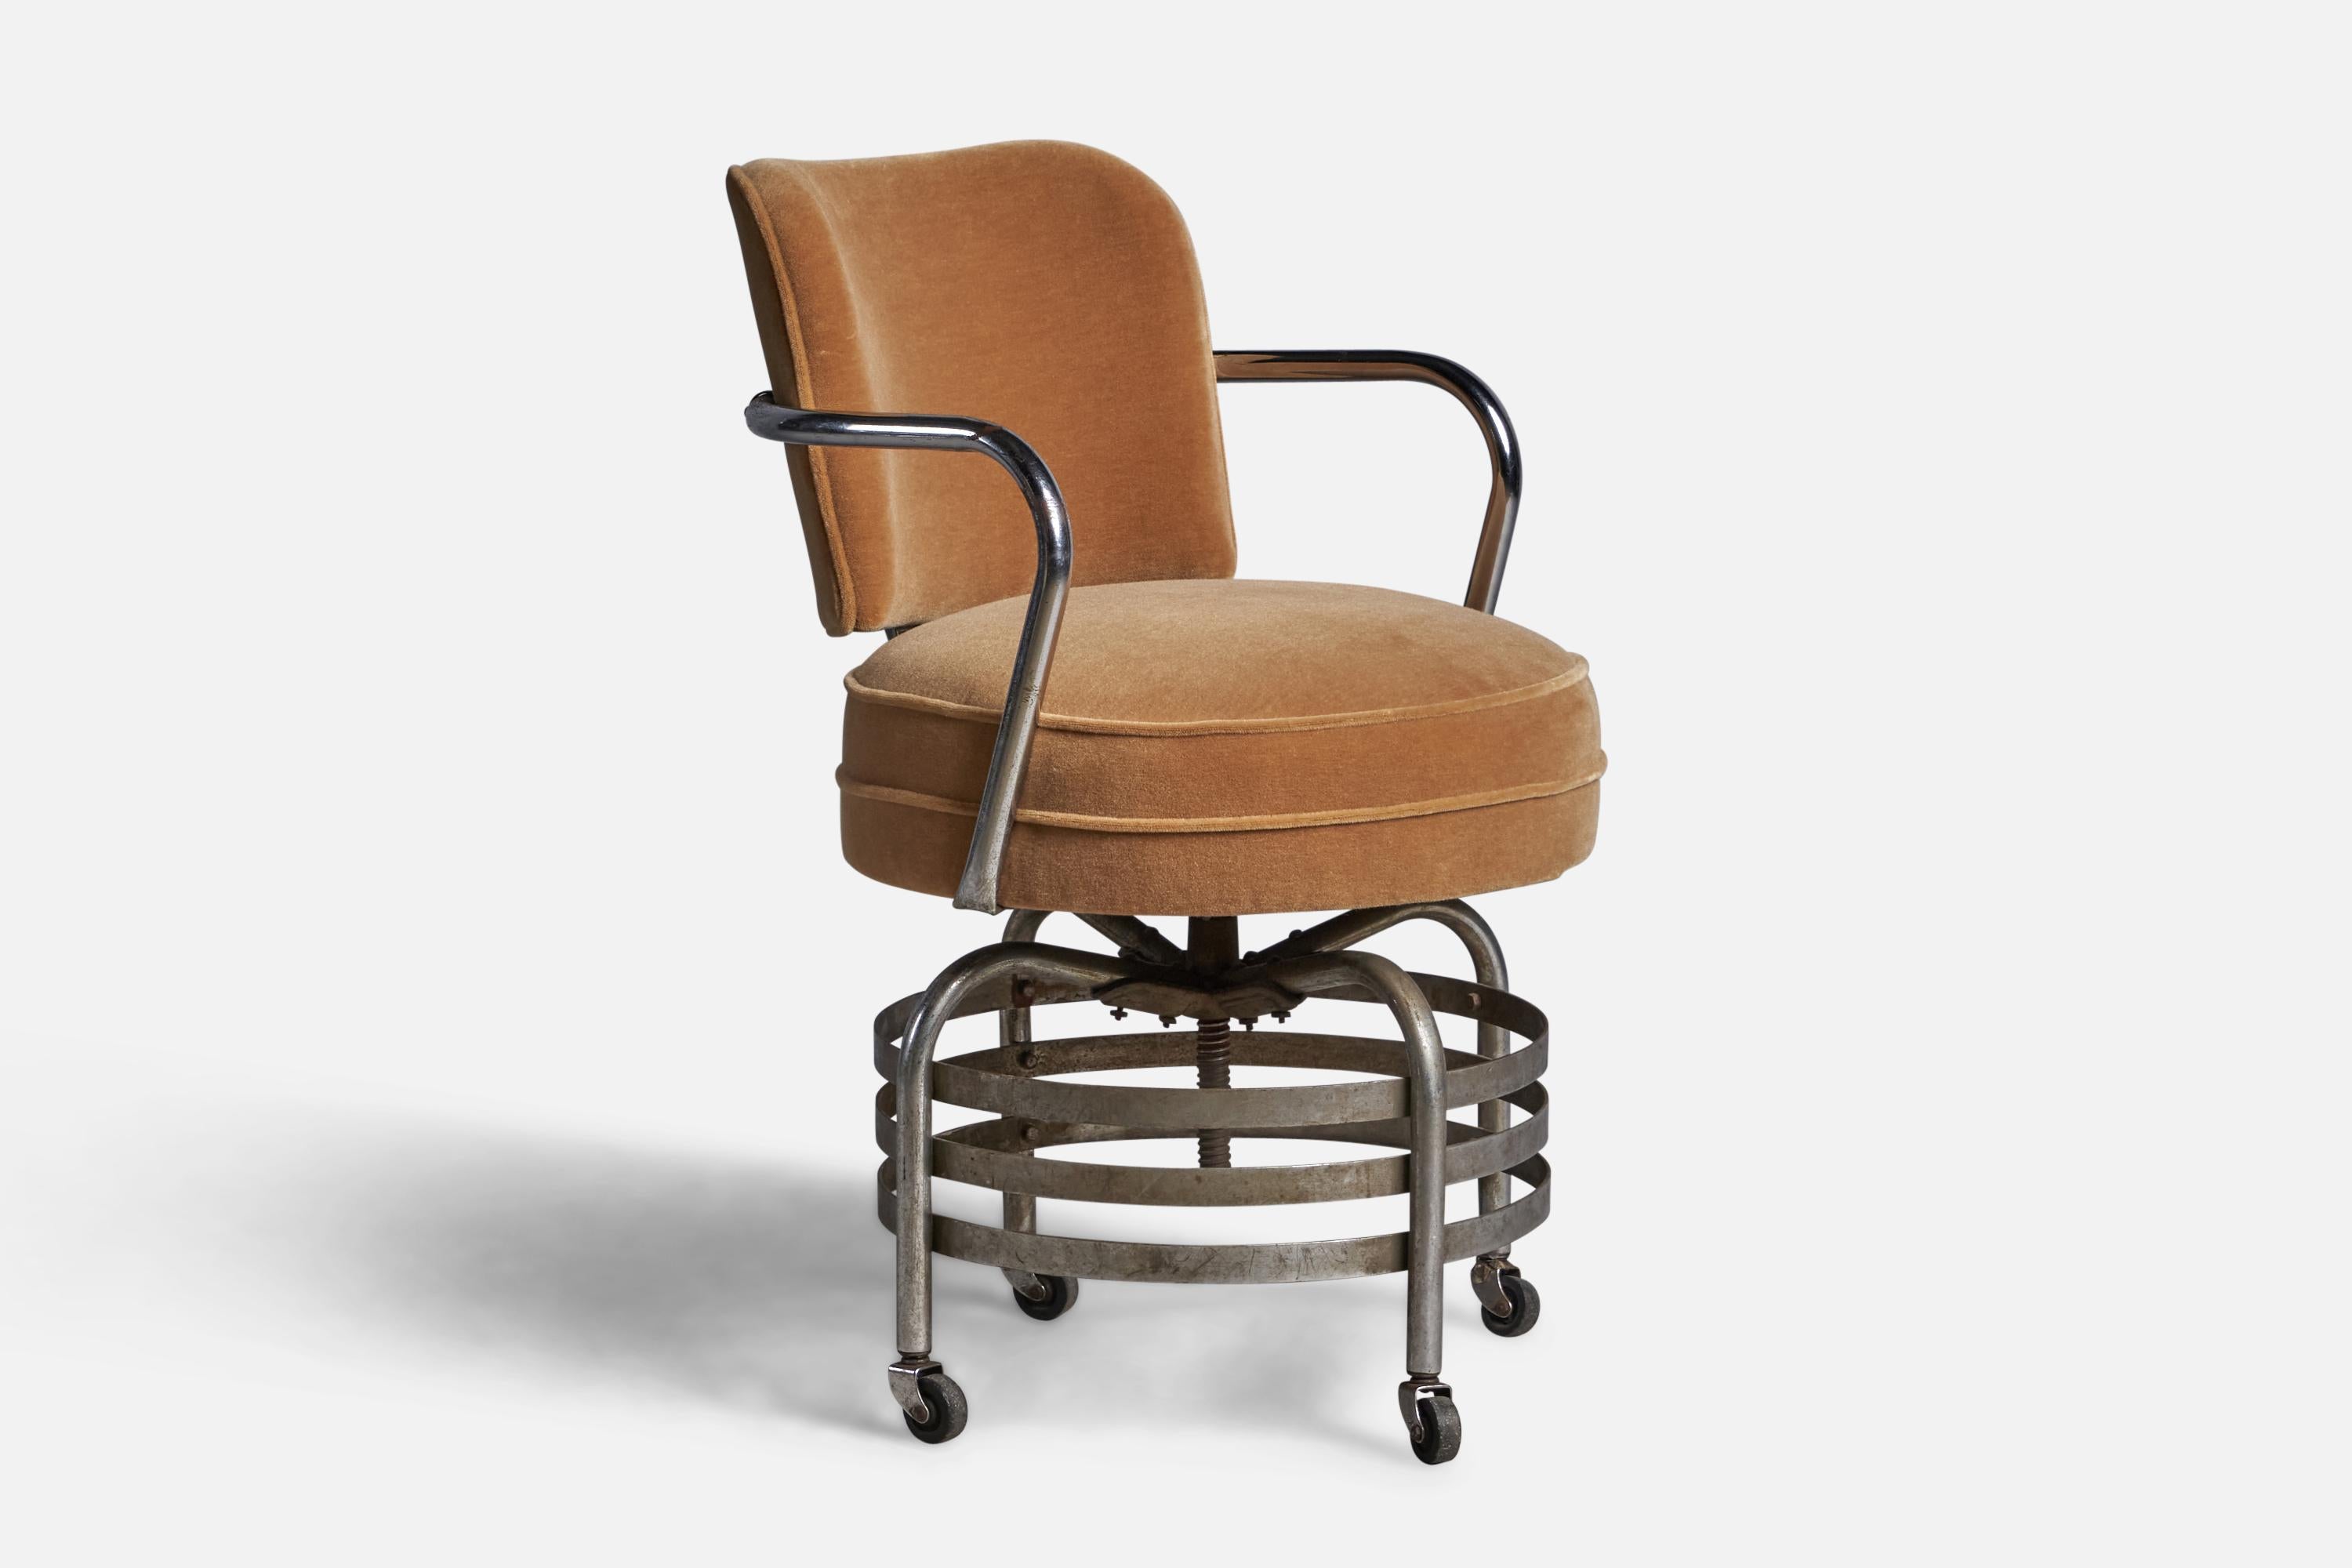 An adjustable chome metal and beige mohair desk chair designed and produced in the US, 1930s. 
21.5” seat height